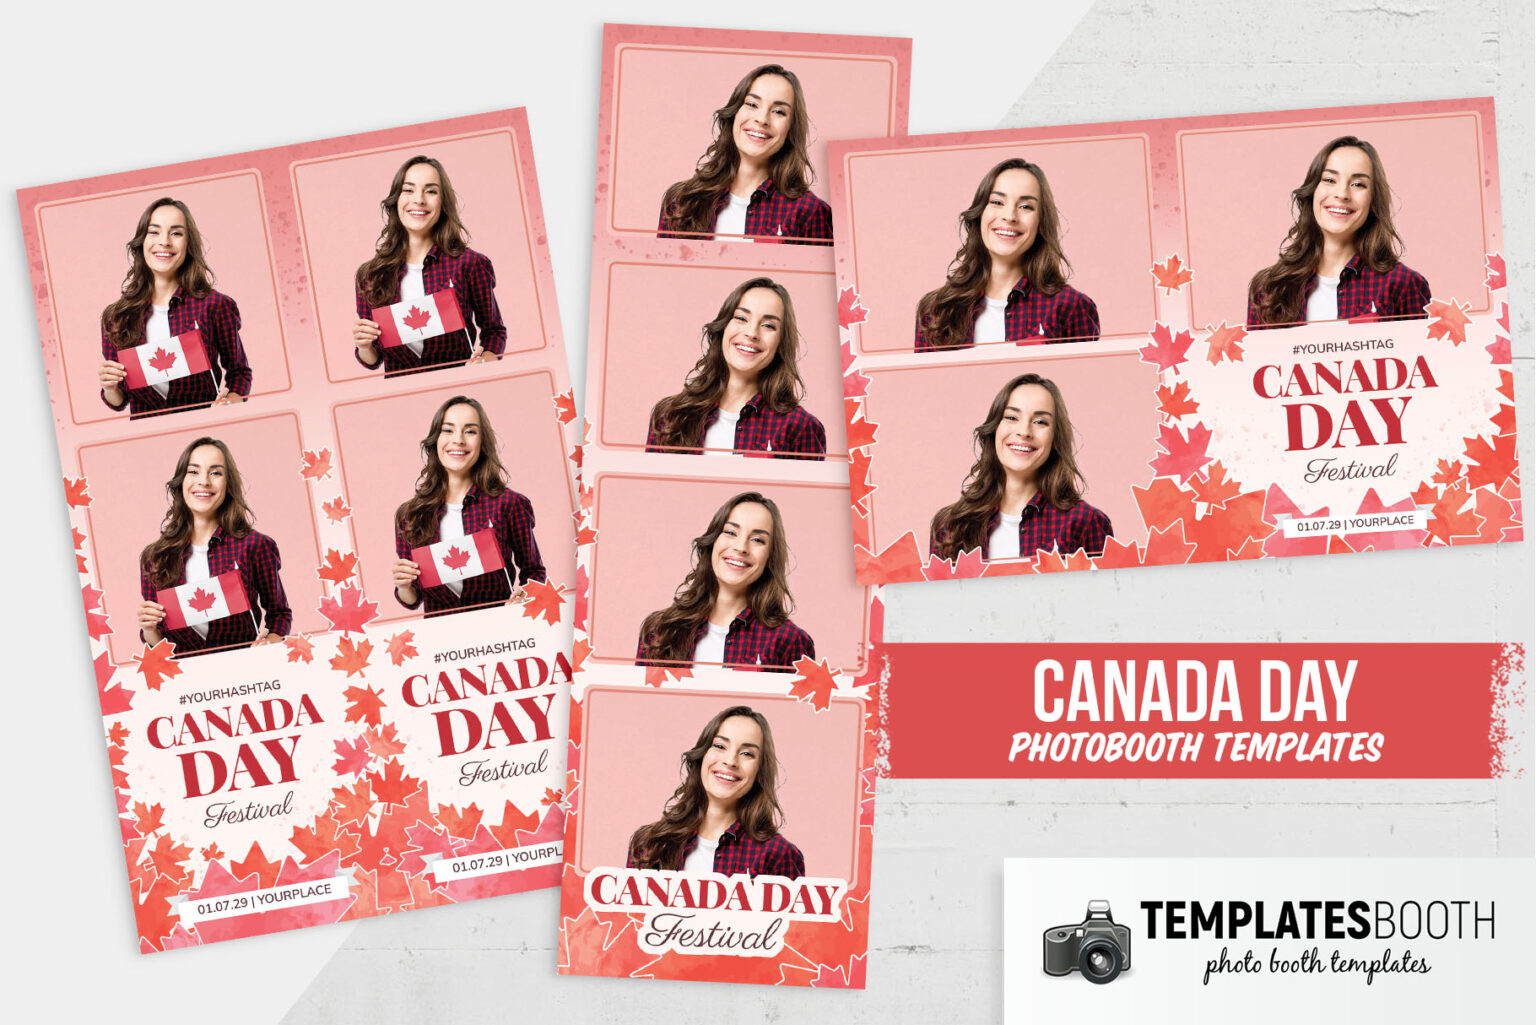 canada-day-photo-booth-templates-templatesbooth